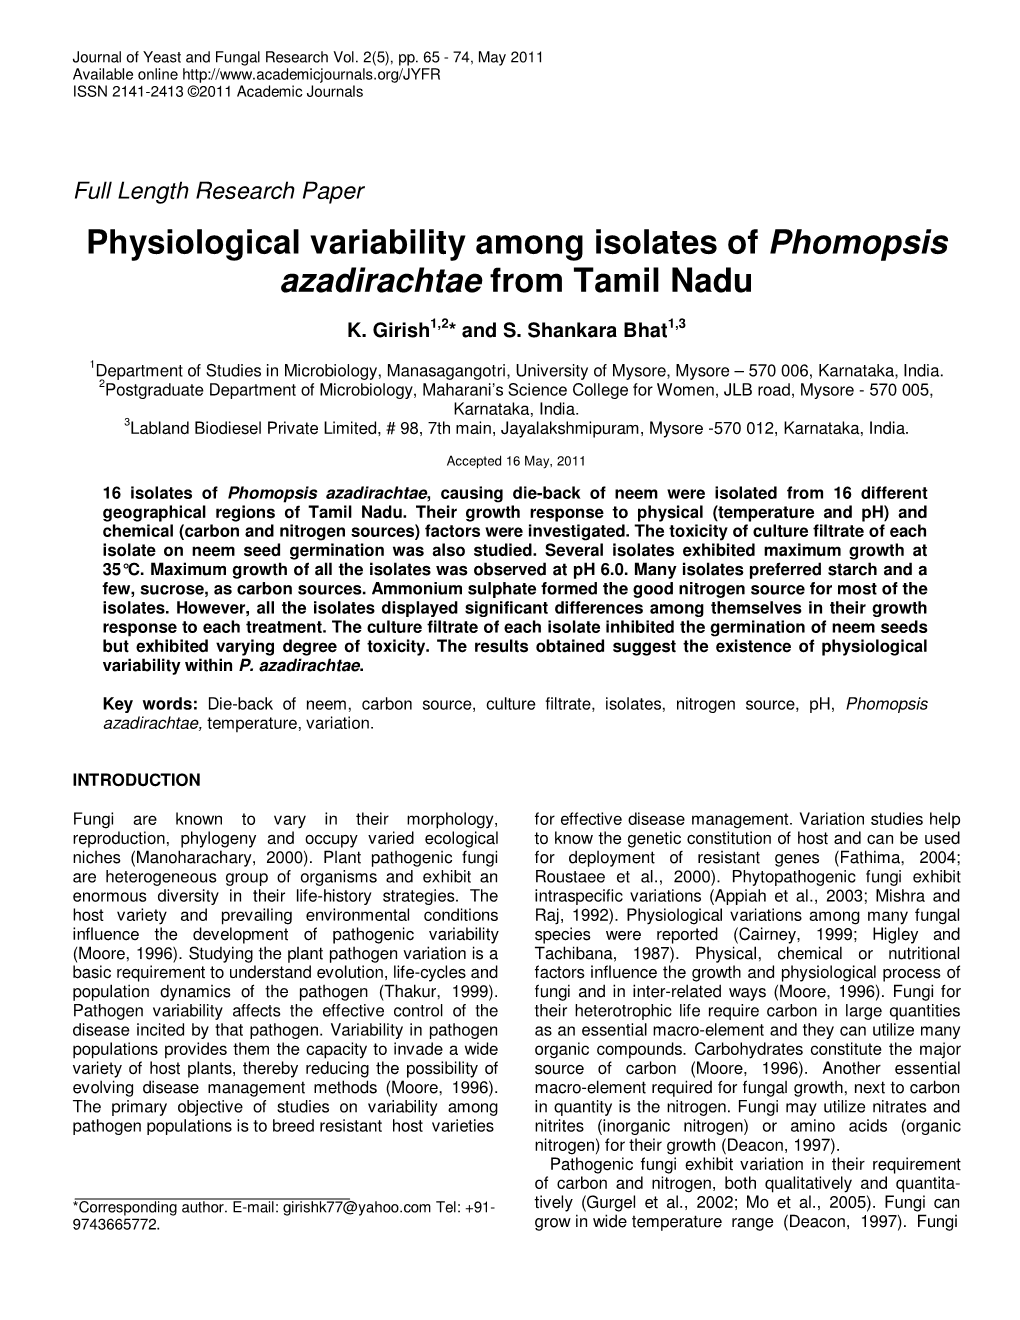 Physiological Variability Among Isolates of Phomopsis Azadirachtae from Tamil Nadu